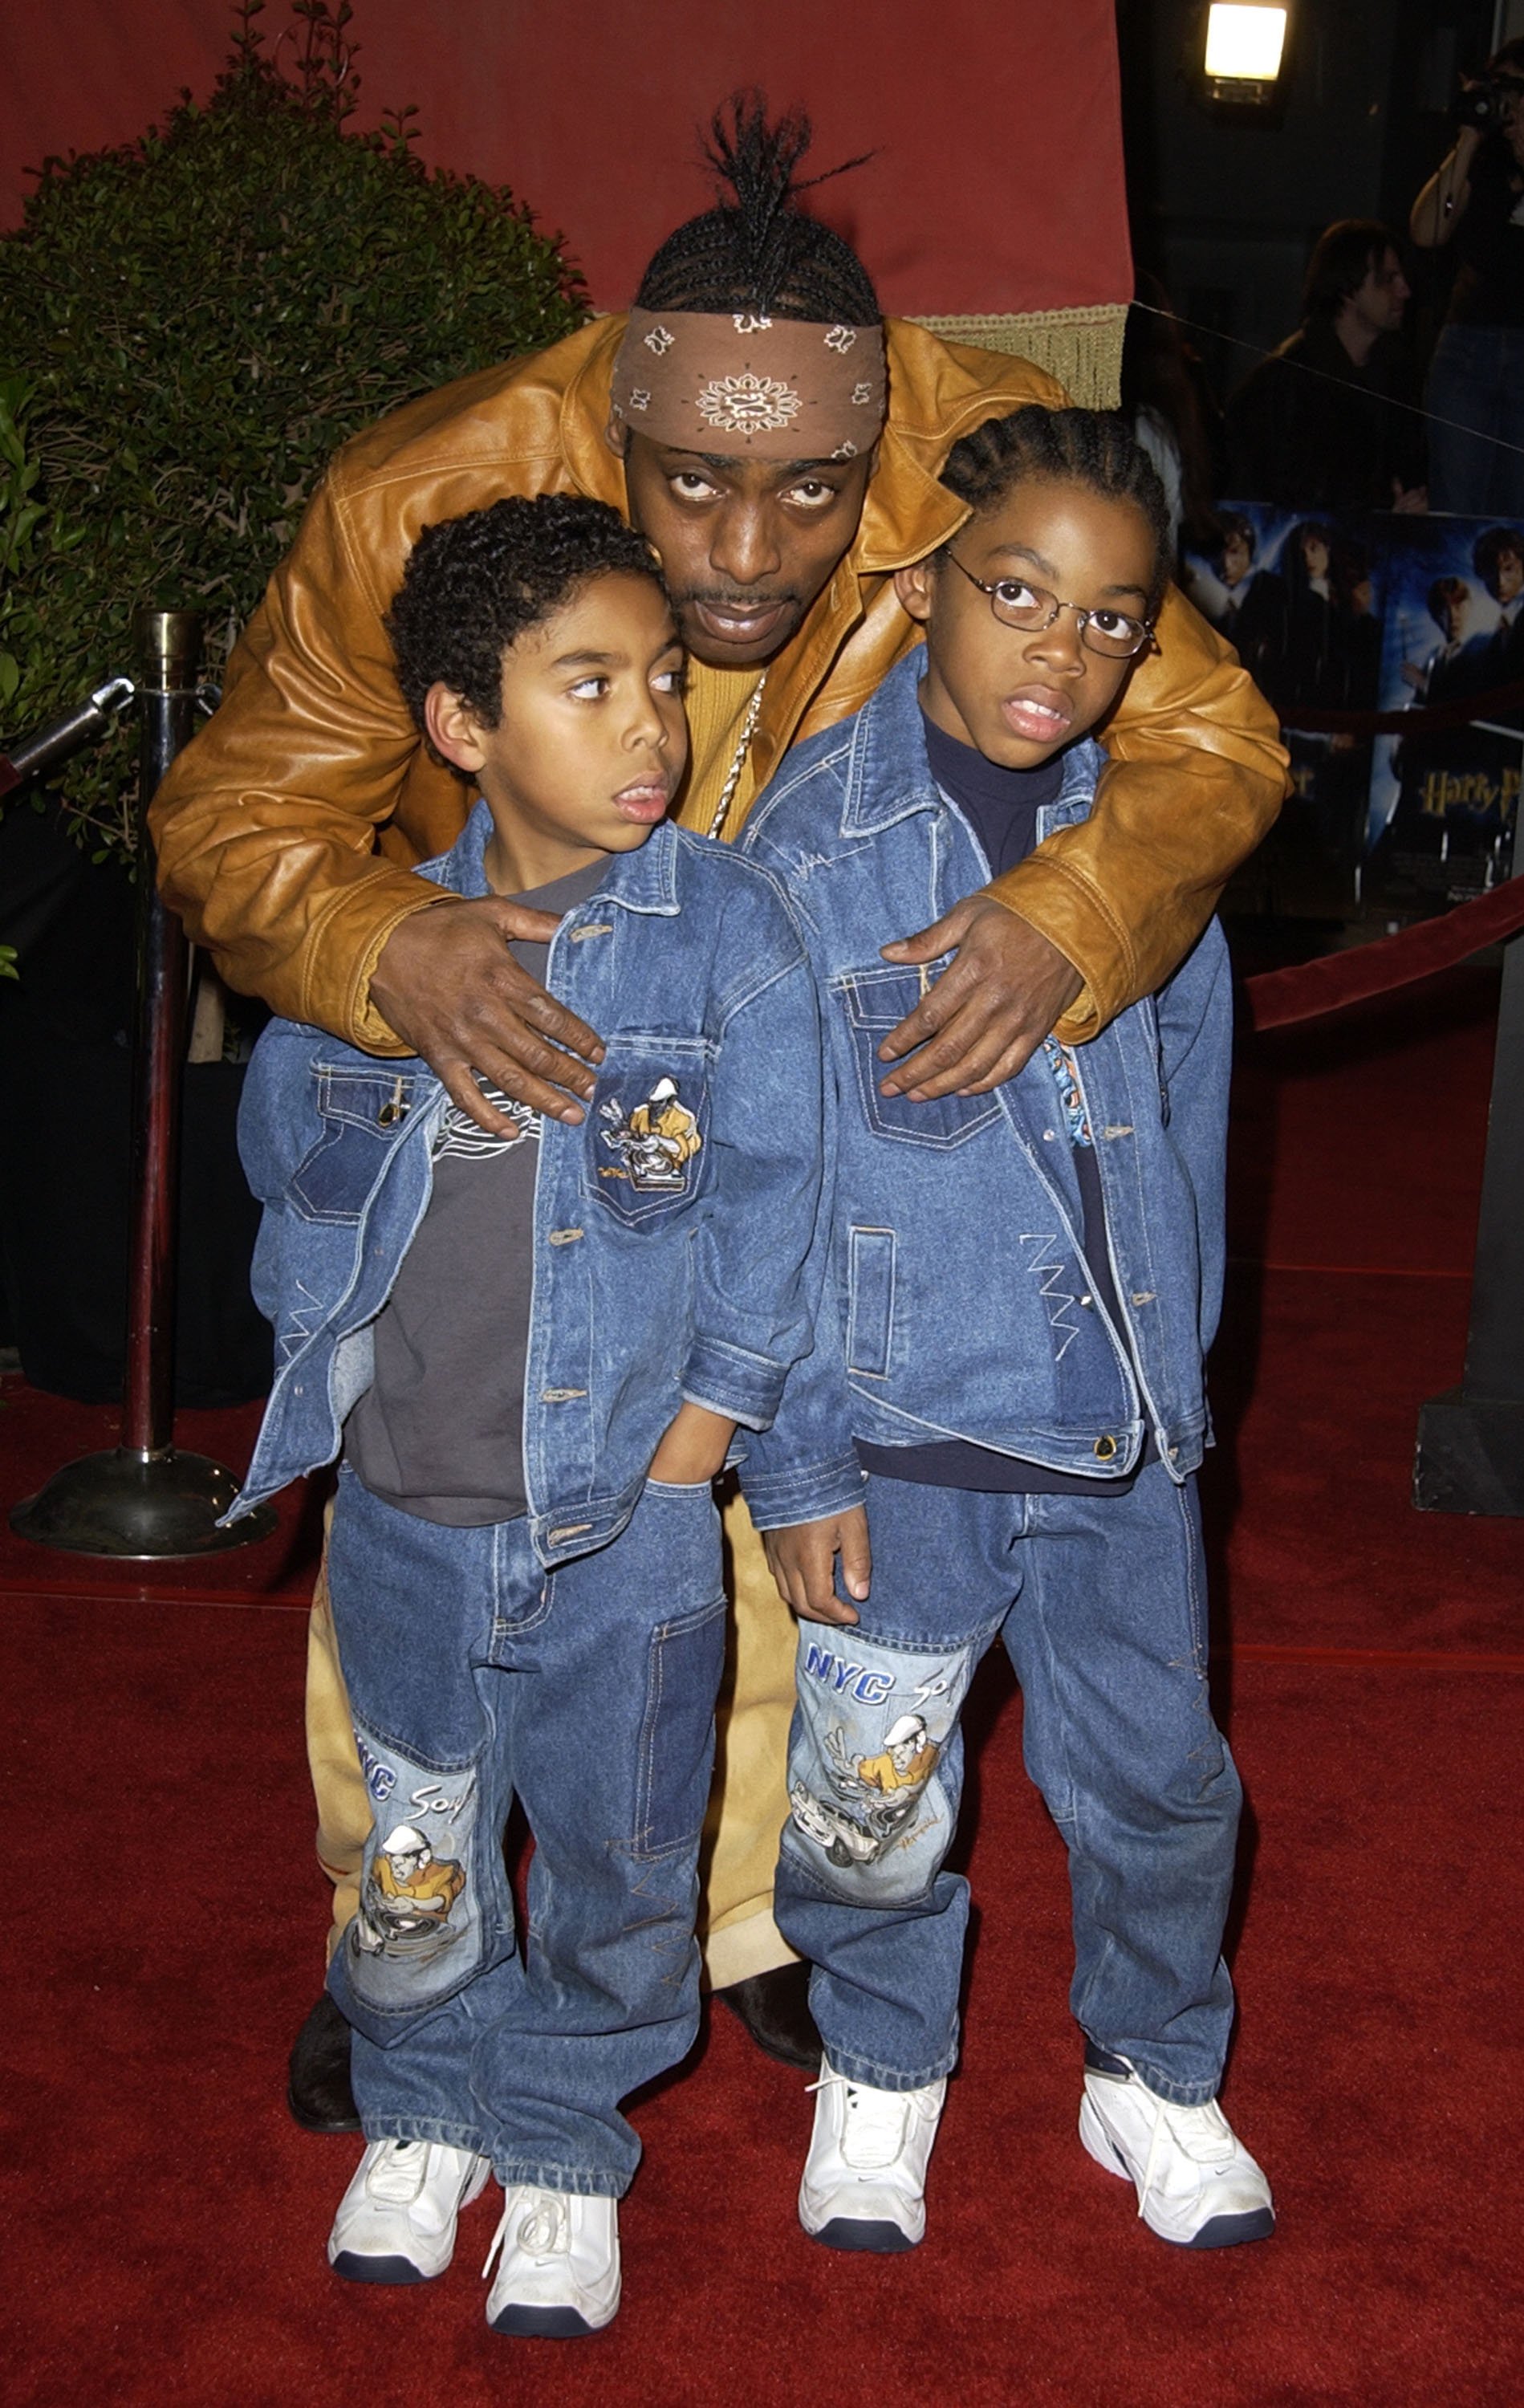 Coolio and his sons at the “Harry Potter and the Chamber of Secrets" premiere in California on November 13, 2002 | Source: Getty Images